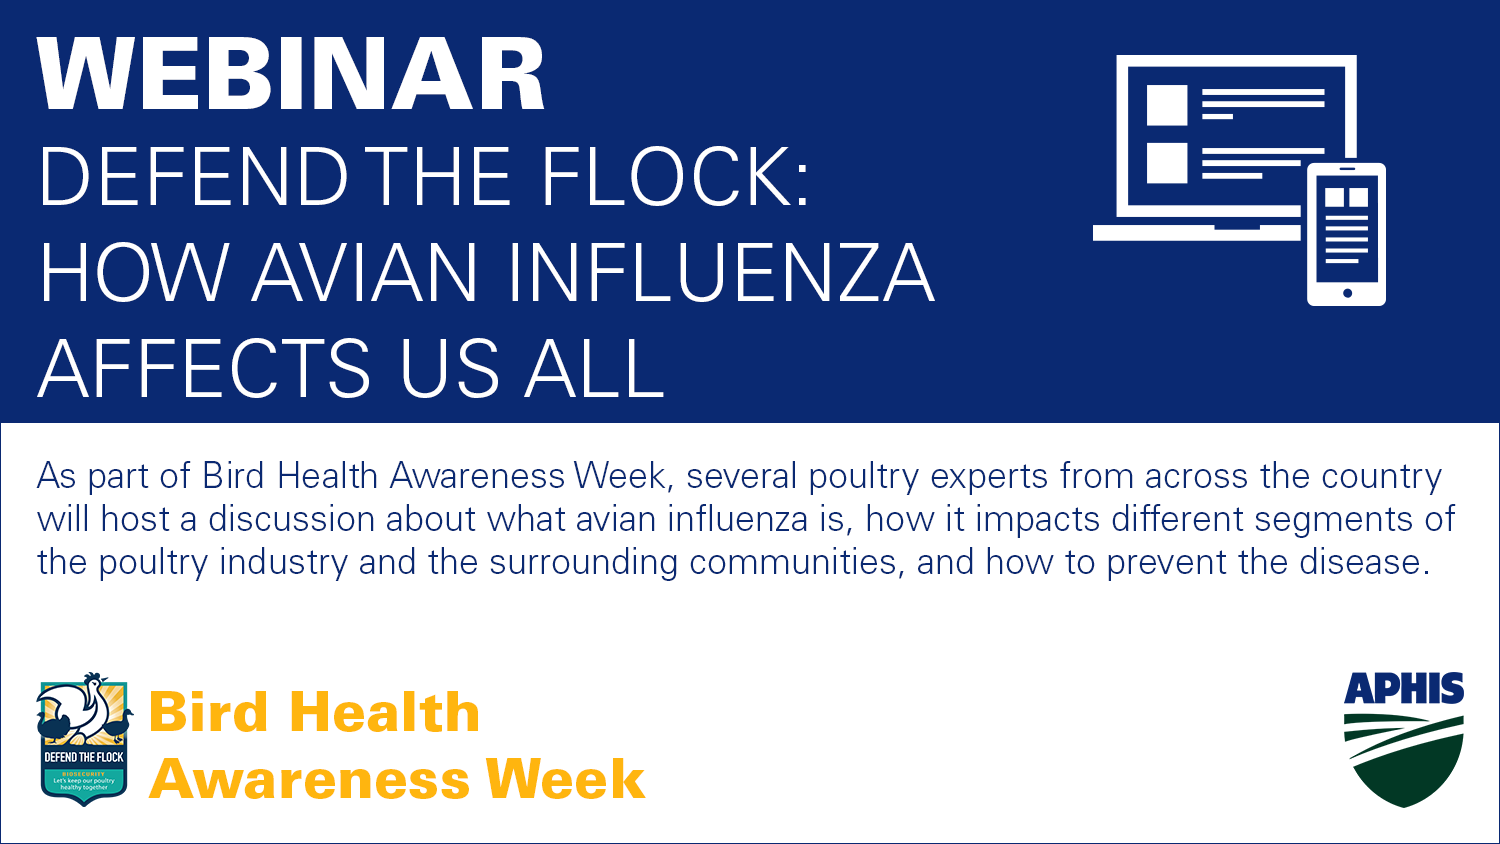 webinar-defend-the-flock-how-avian-influenza-affects-us-all-nc-state-extension